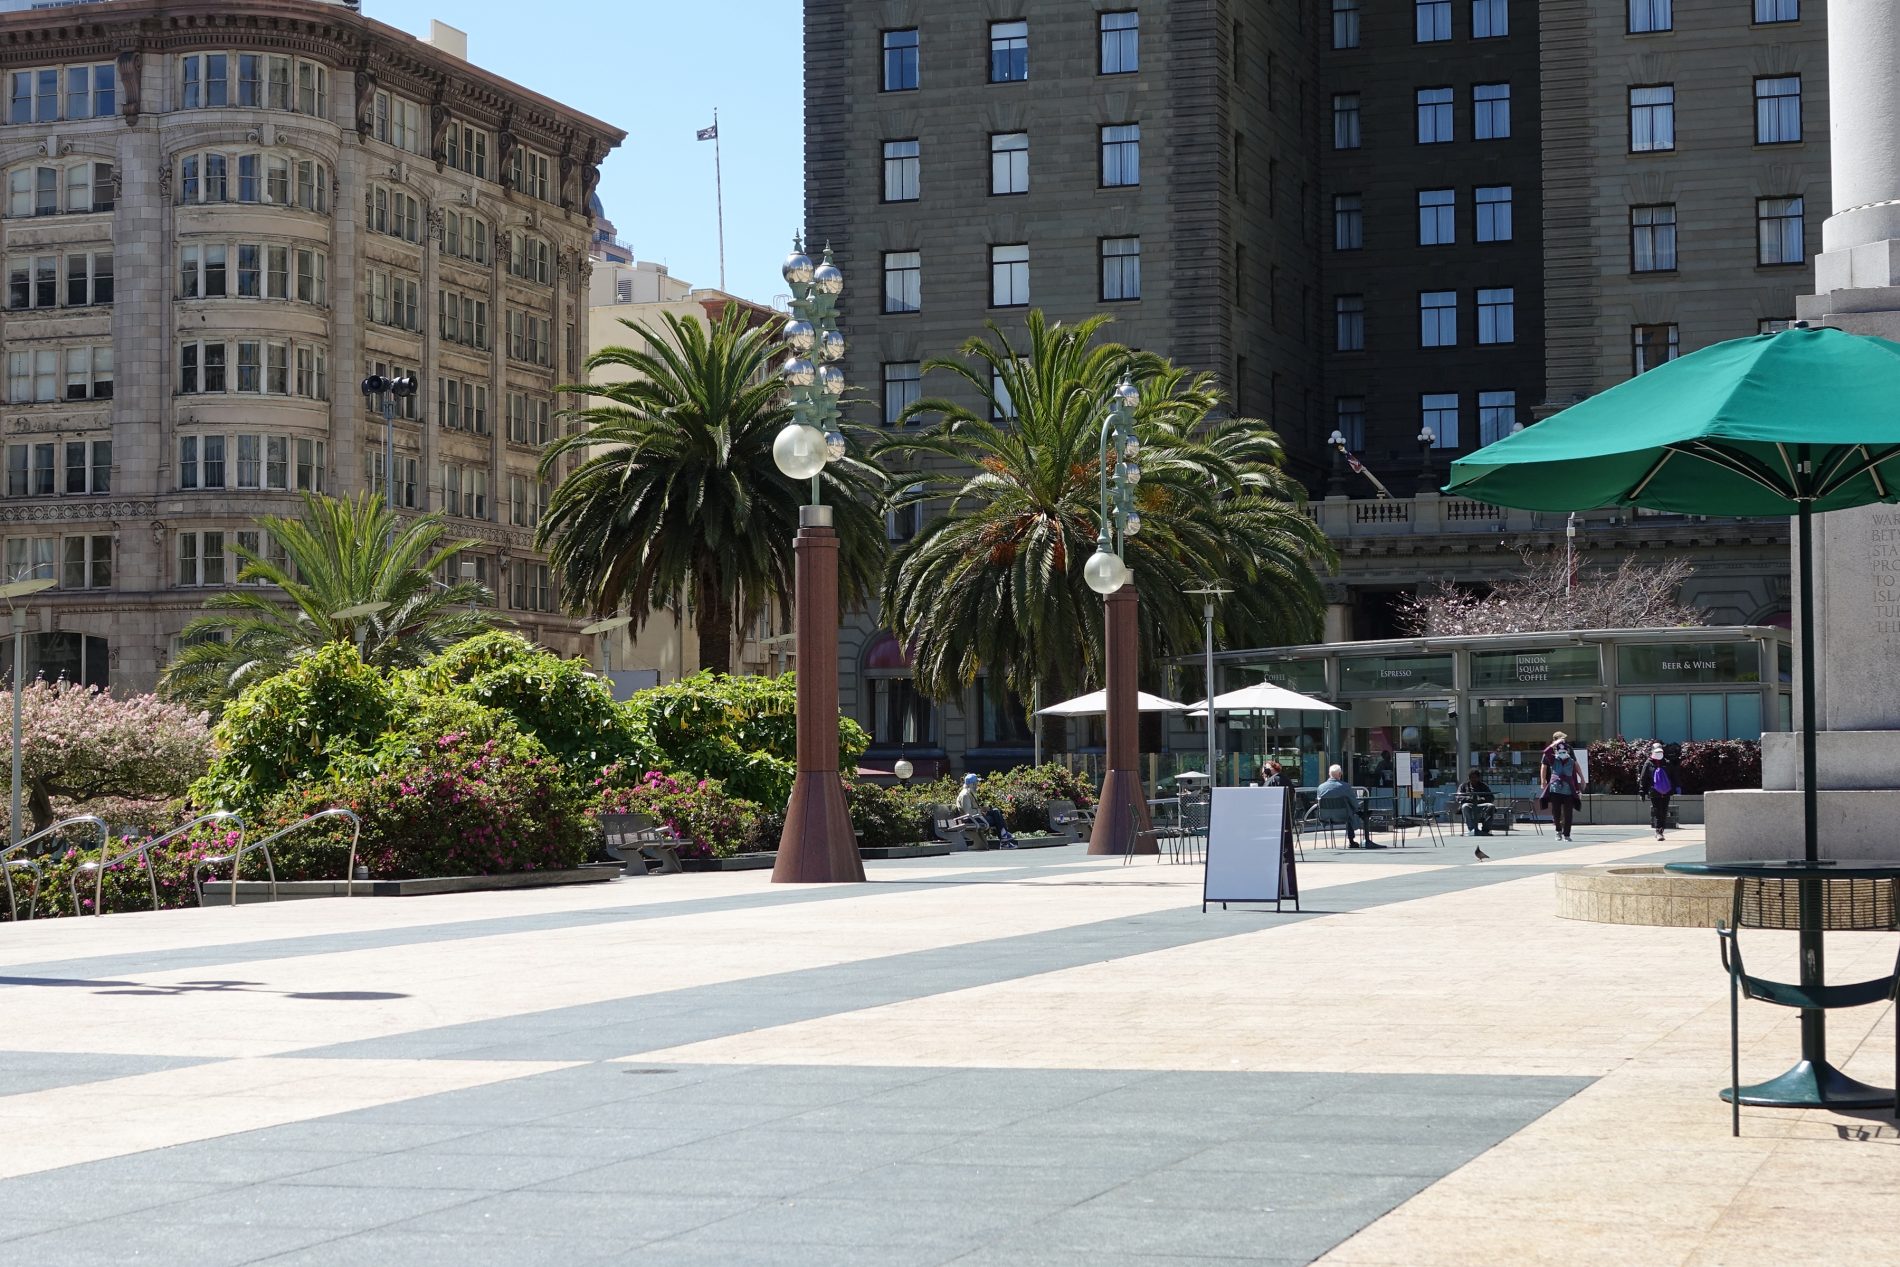 The Barbary coast Trail goes through Union Square in San Francisco’s upscale shopping district.